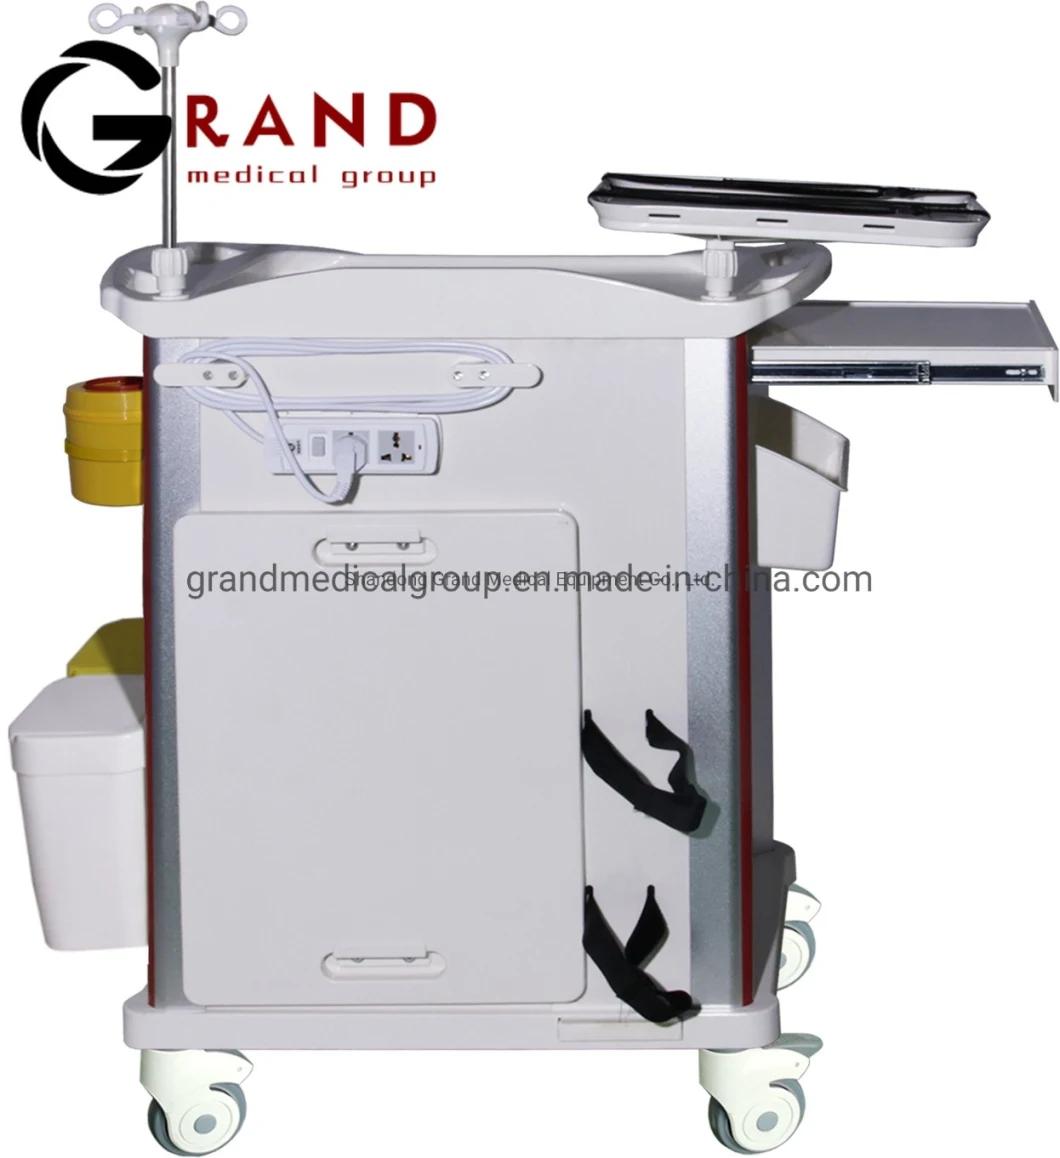 Italy Design High Quality Double Side Medicine Trolley with Drawers, Boxes, Garbage Bin